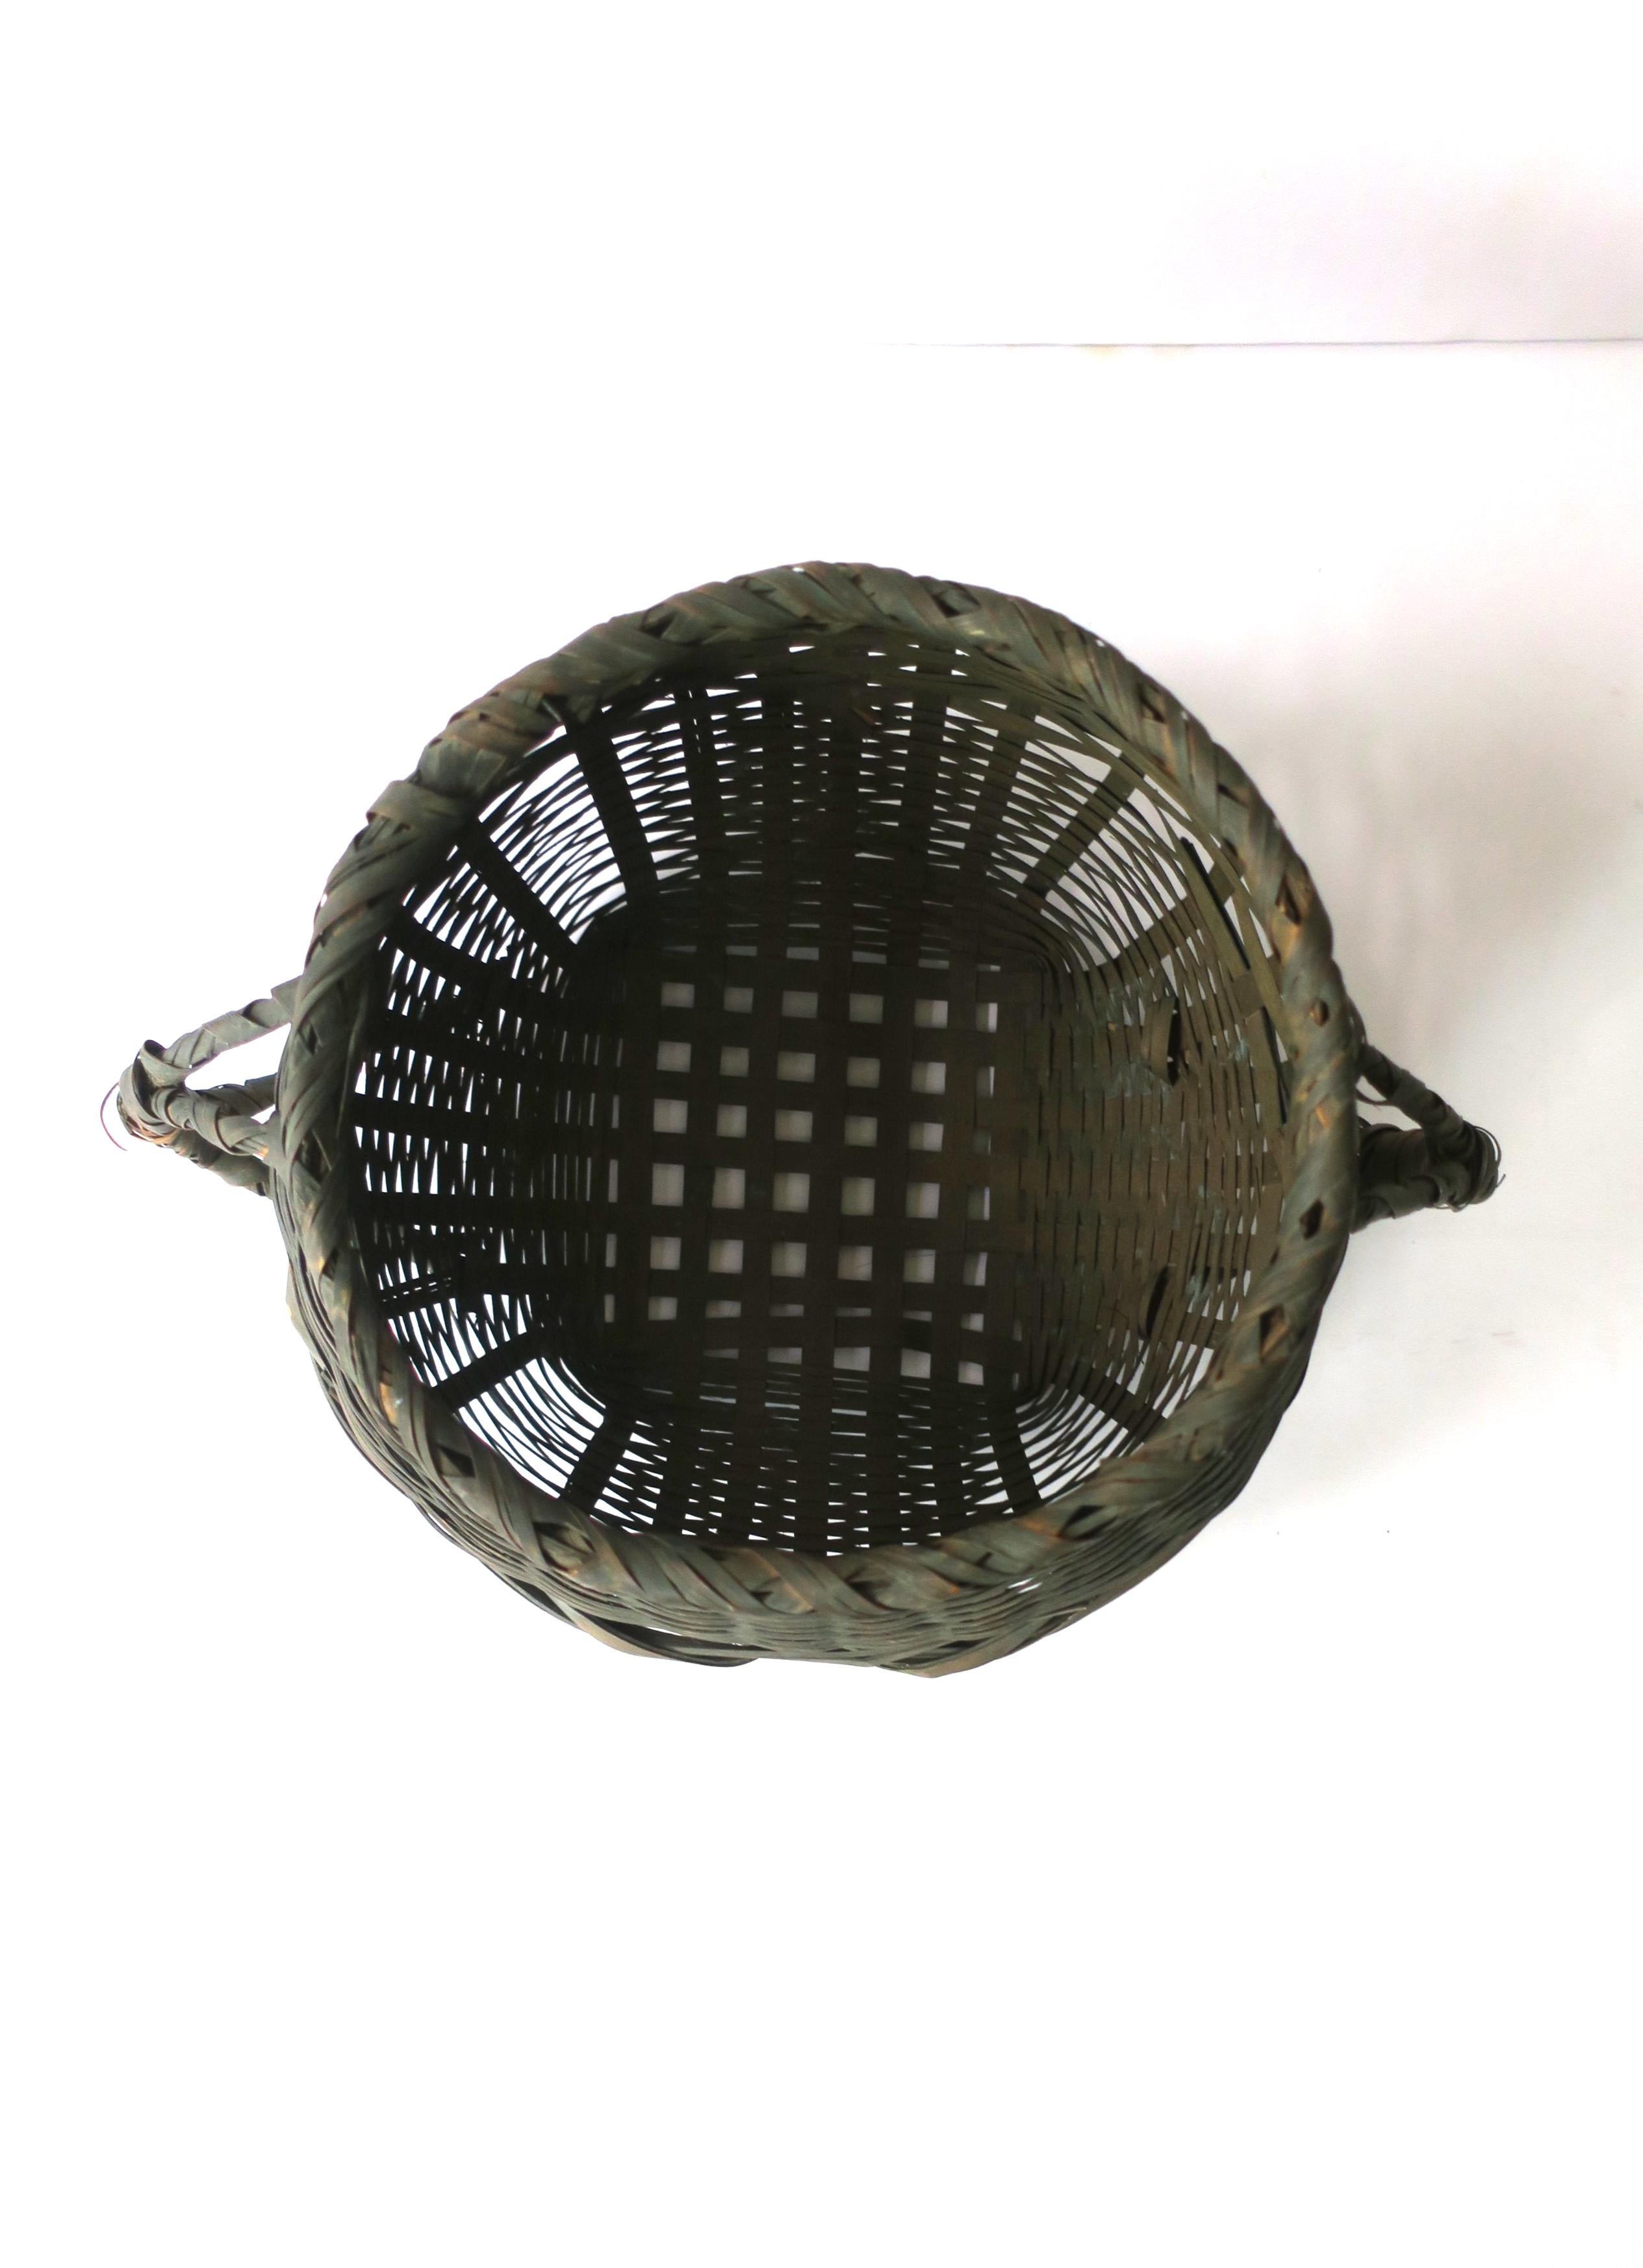 Antique Wicker Green Splint Basket In Good Condition For Sale In New York, NY